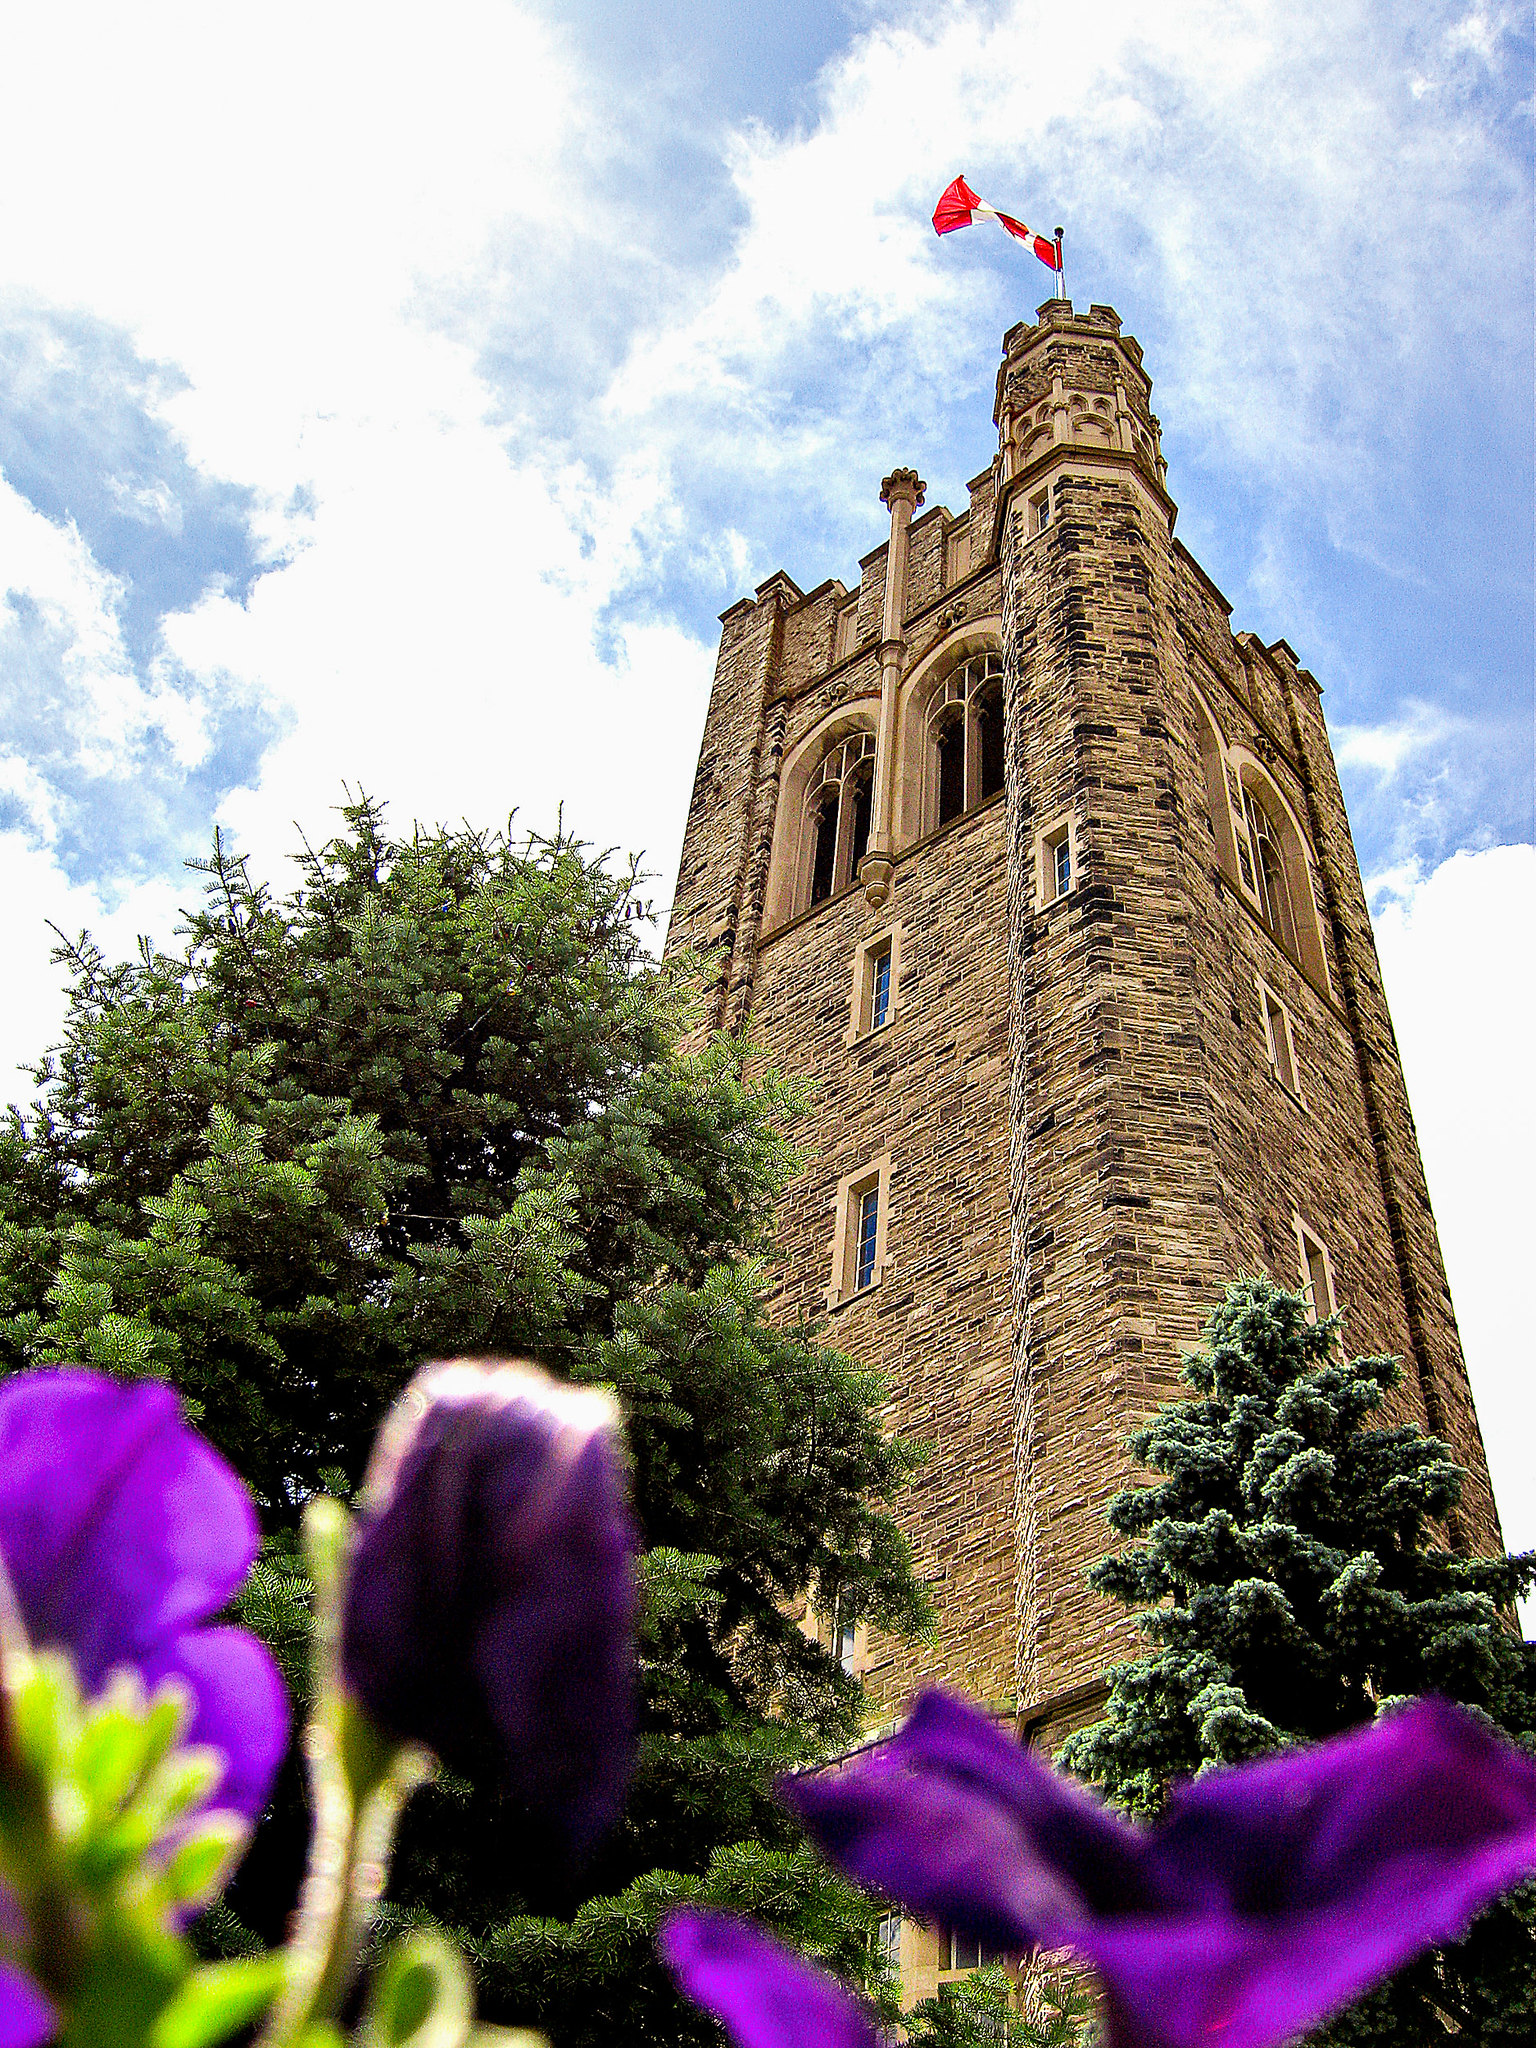 University College tower at UWO with purple tulips in the foreground